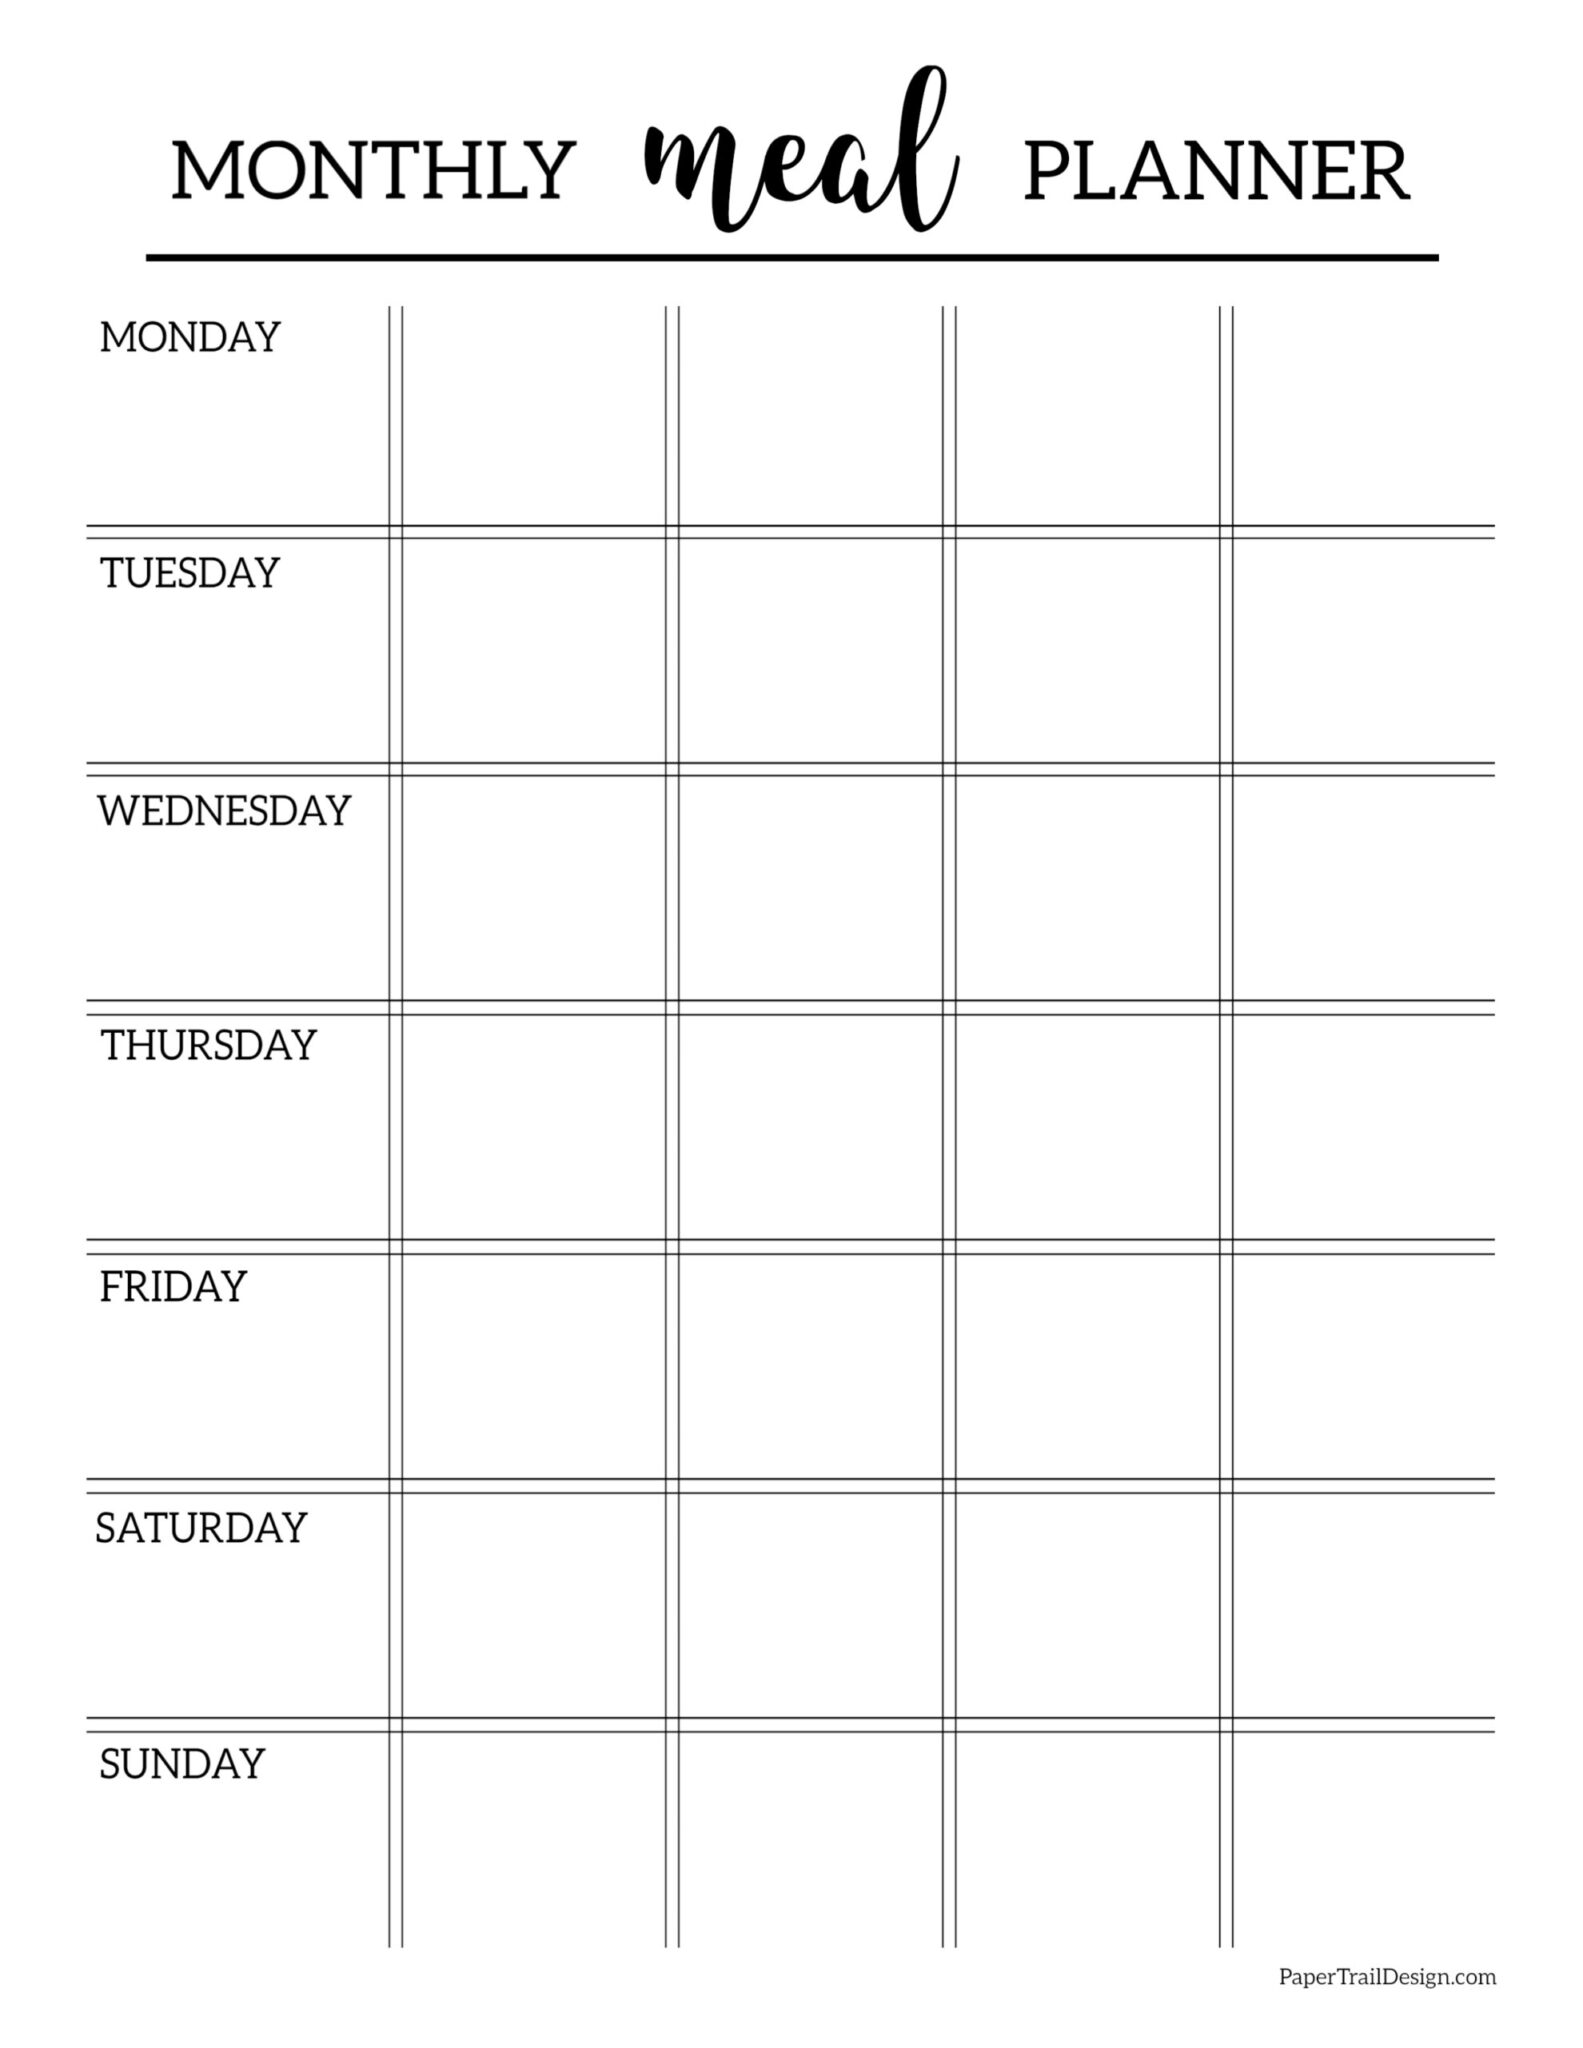 Free Printable Monthly Meal Planner Template Paper Trail Design